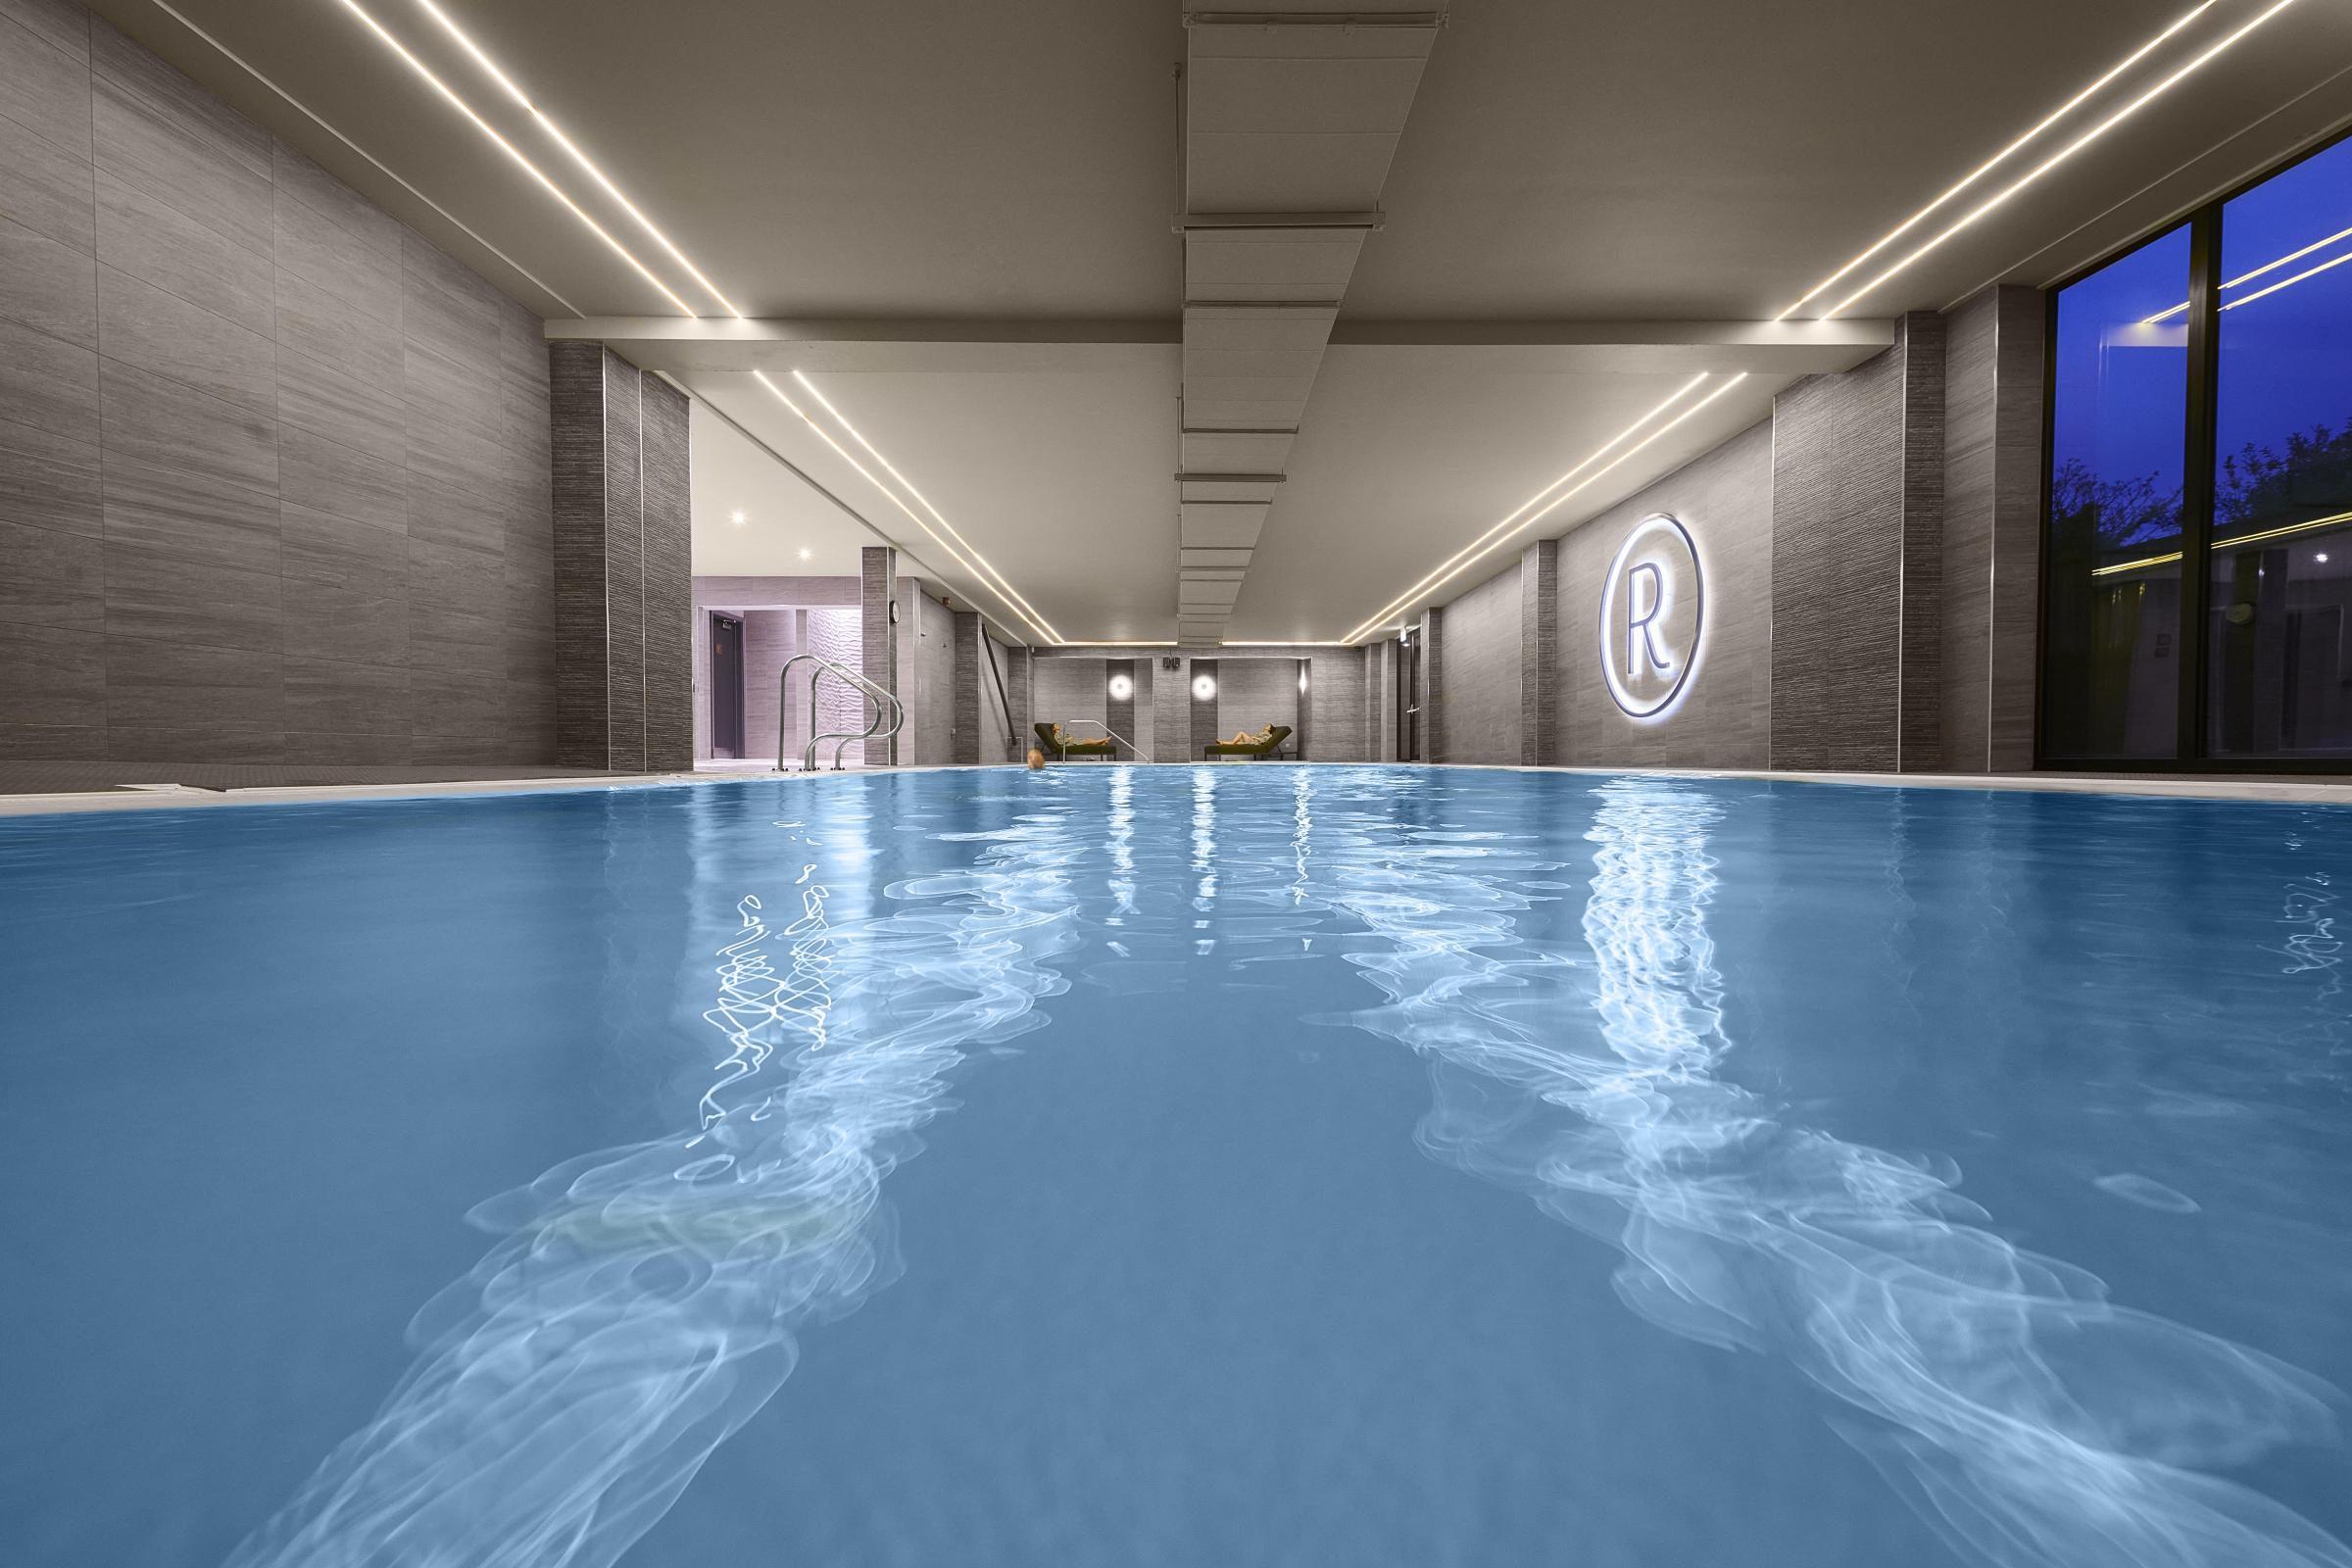 The pool was part of the £1million makeover